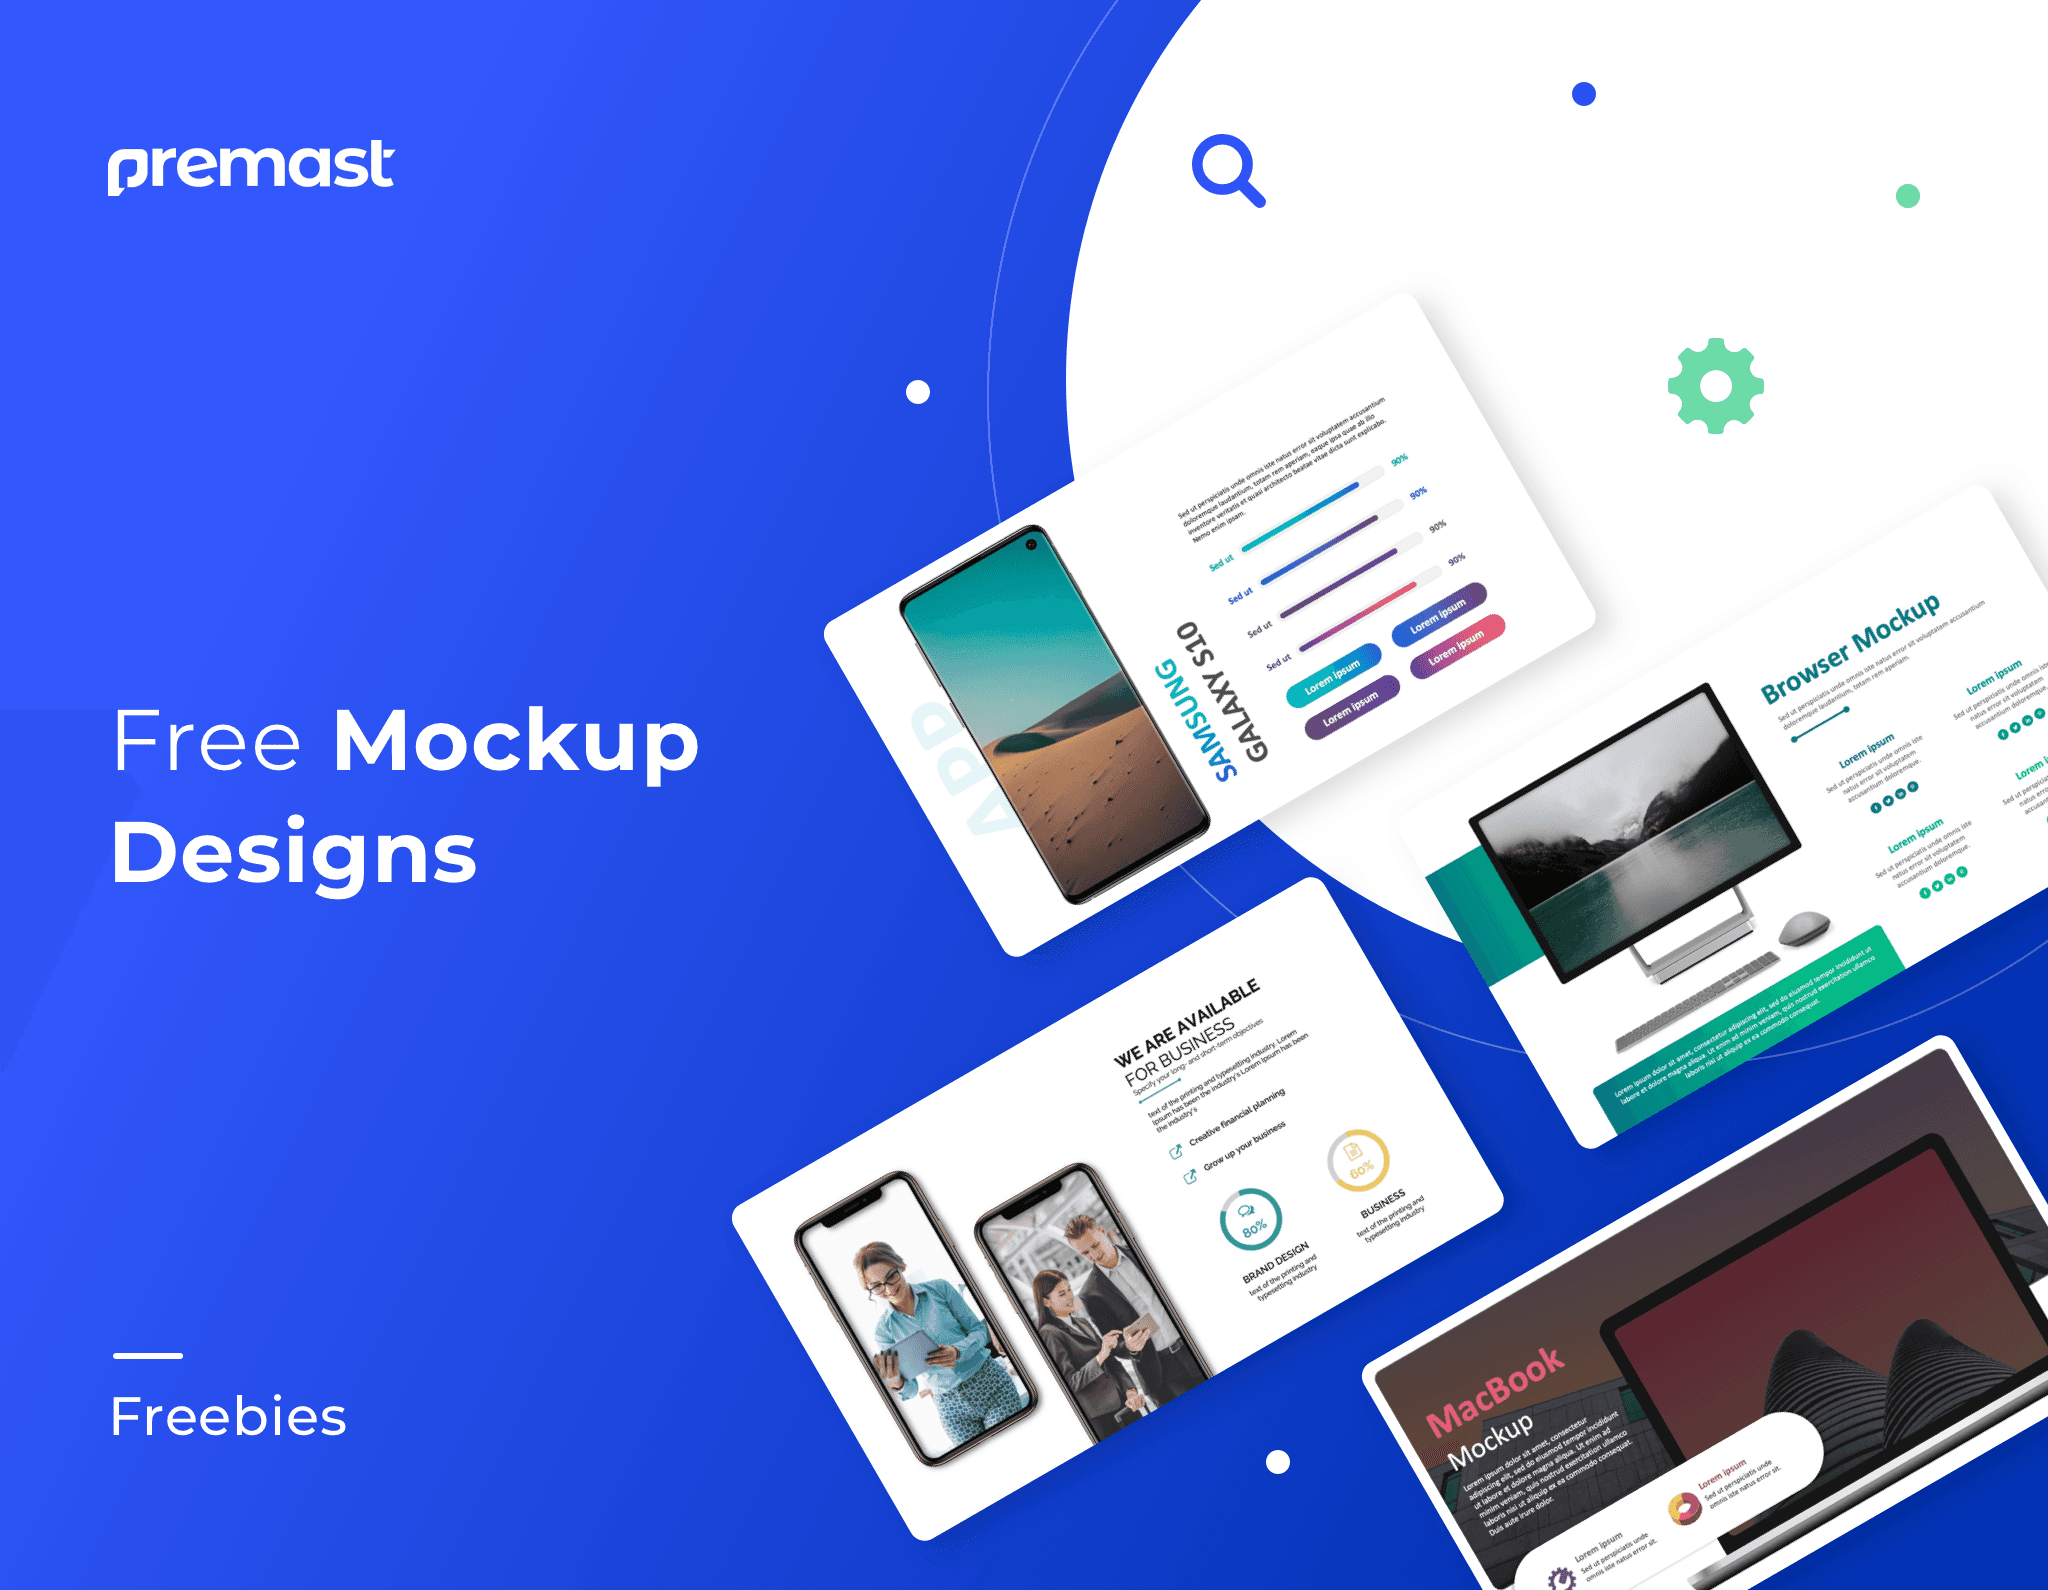 Multiple Free Mockups designs – Editable with unlimited options